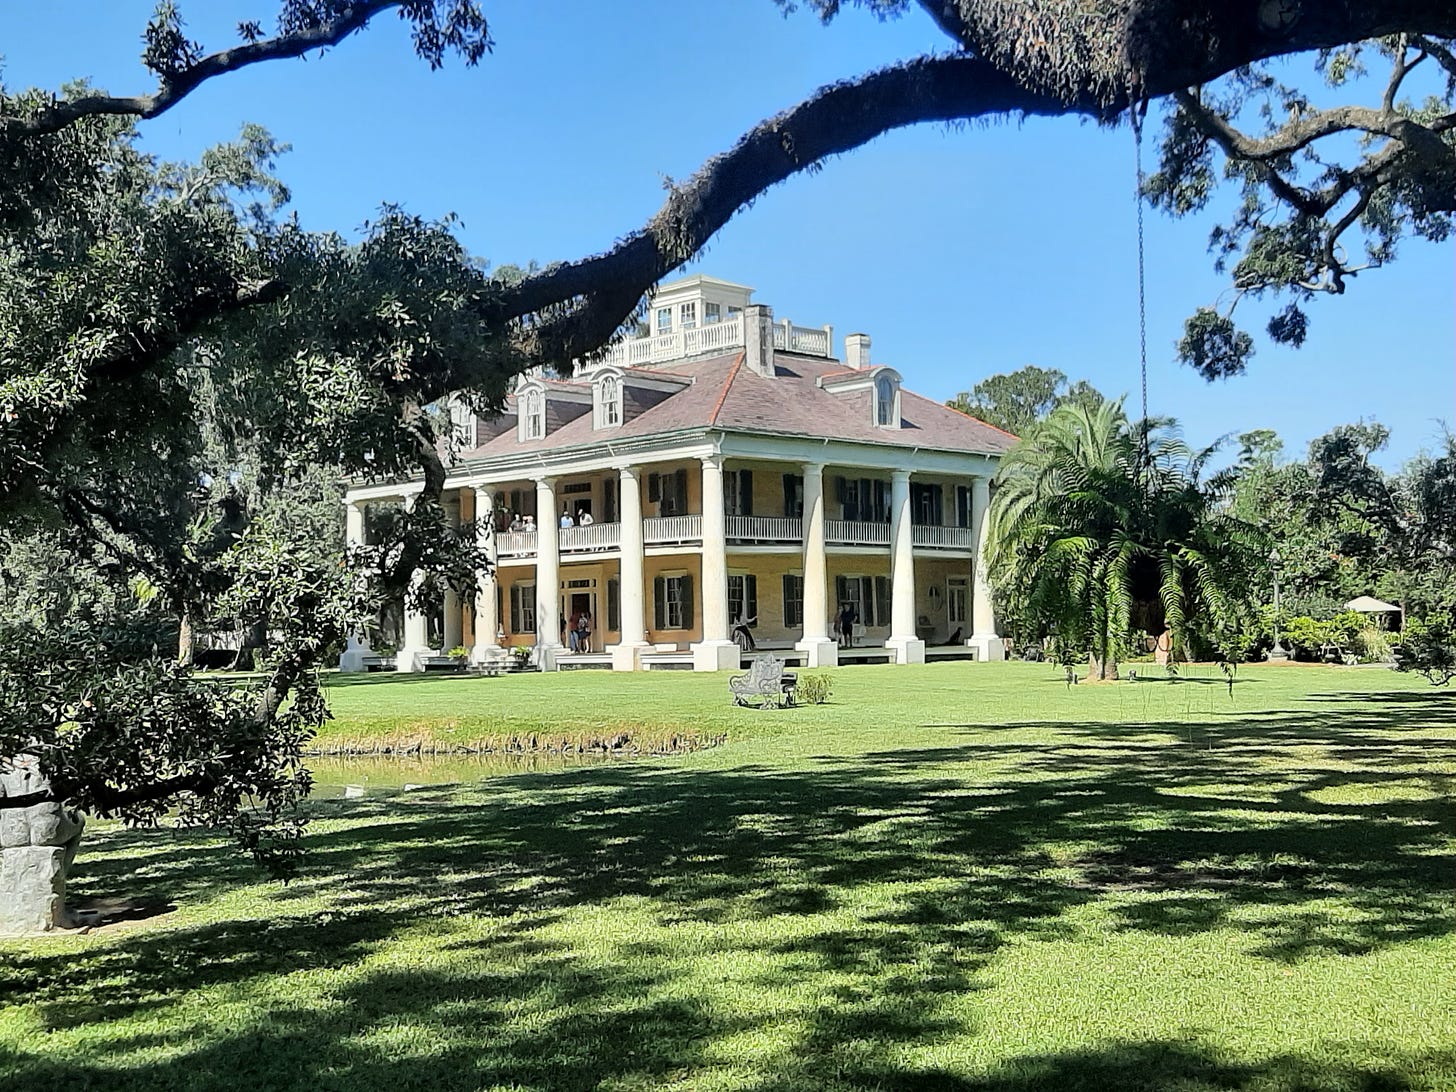 The outside of the stately houmas house with a live oak tree limb in the foreground.